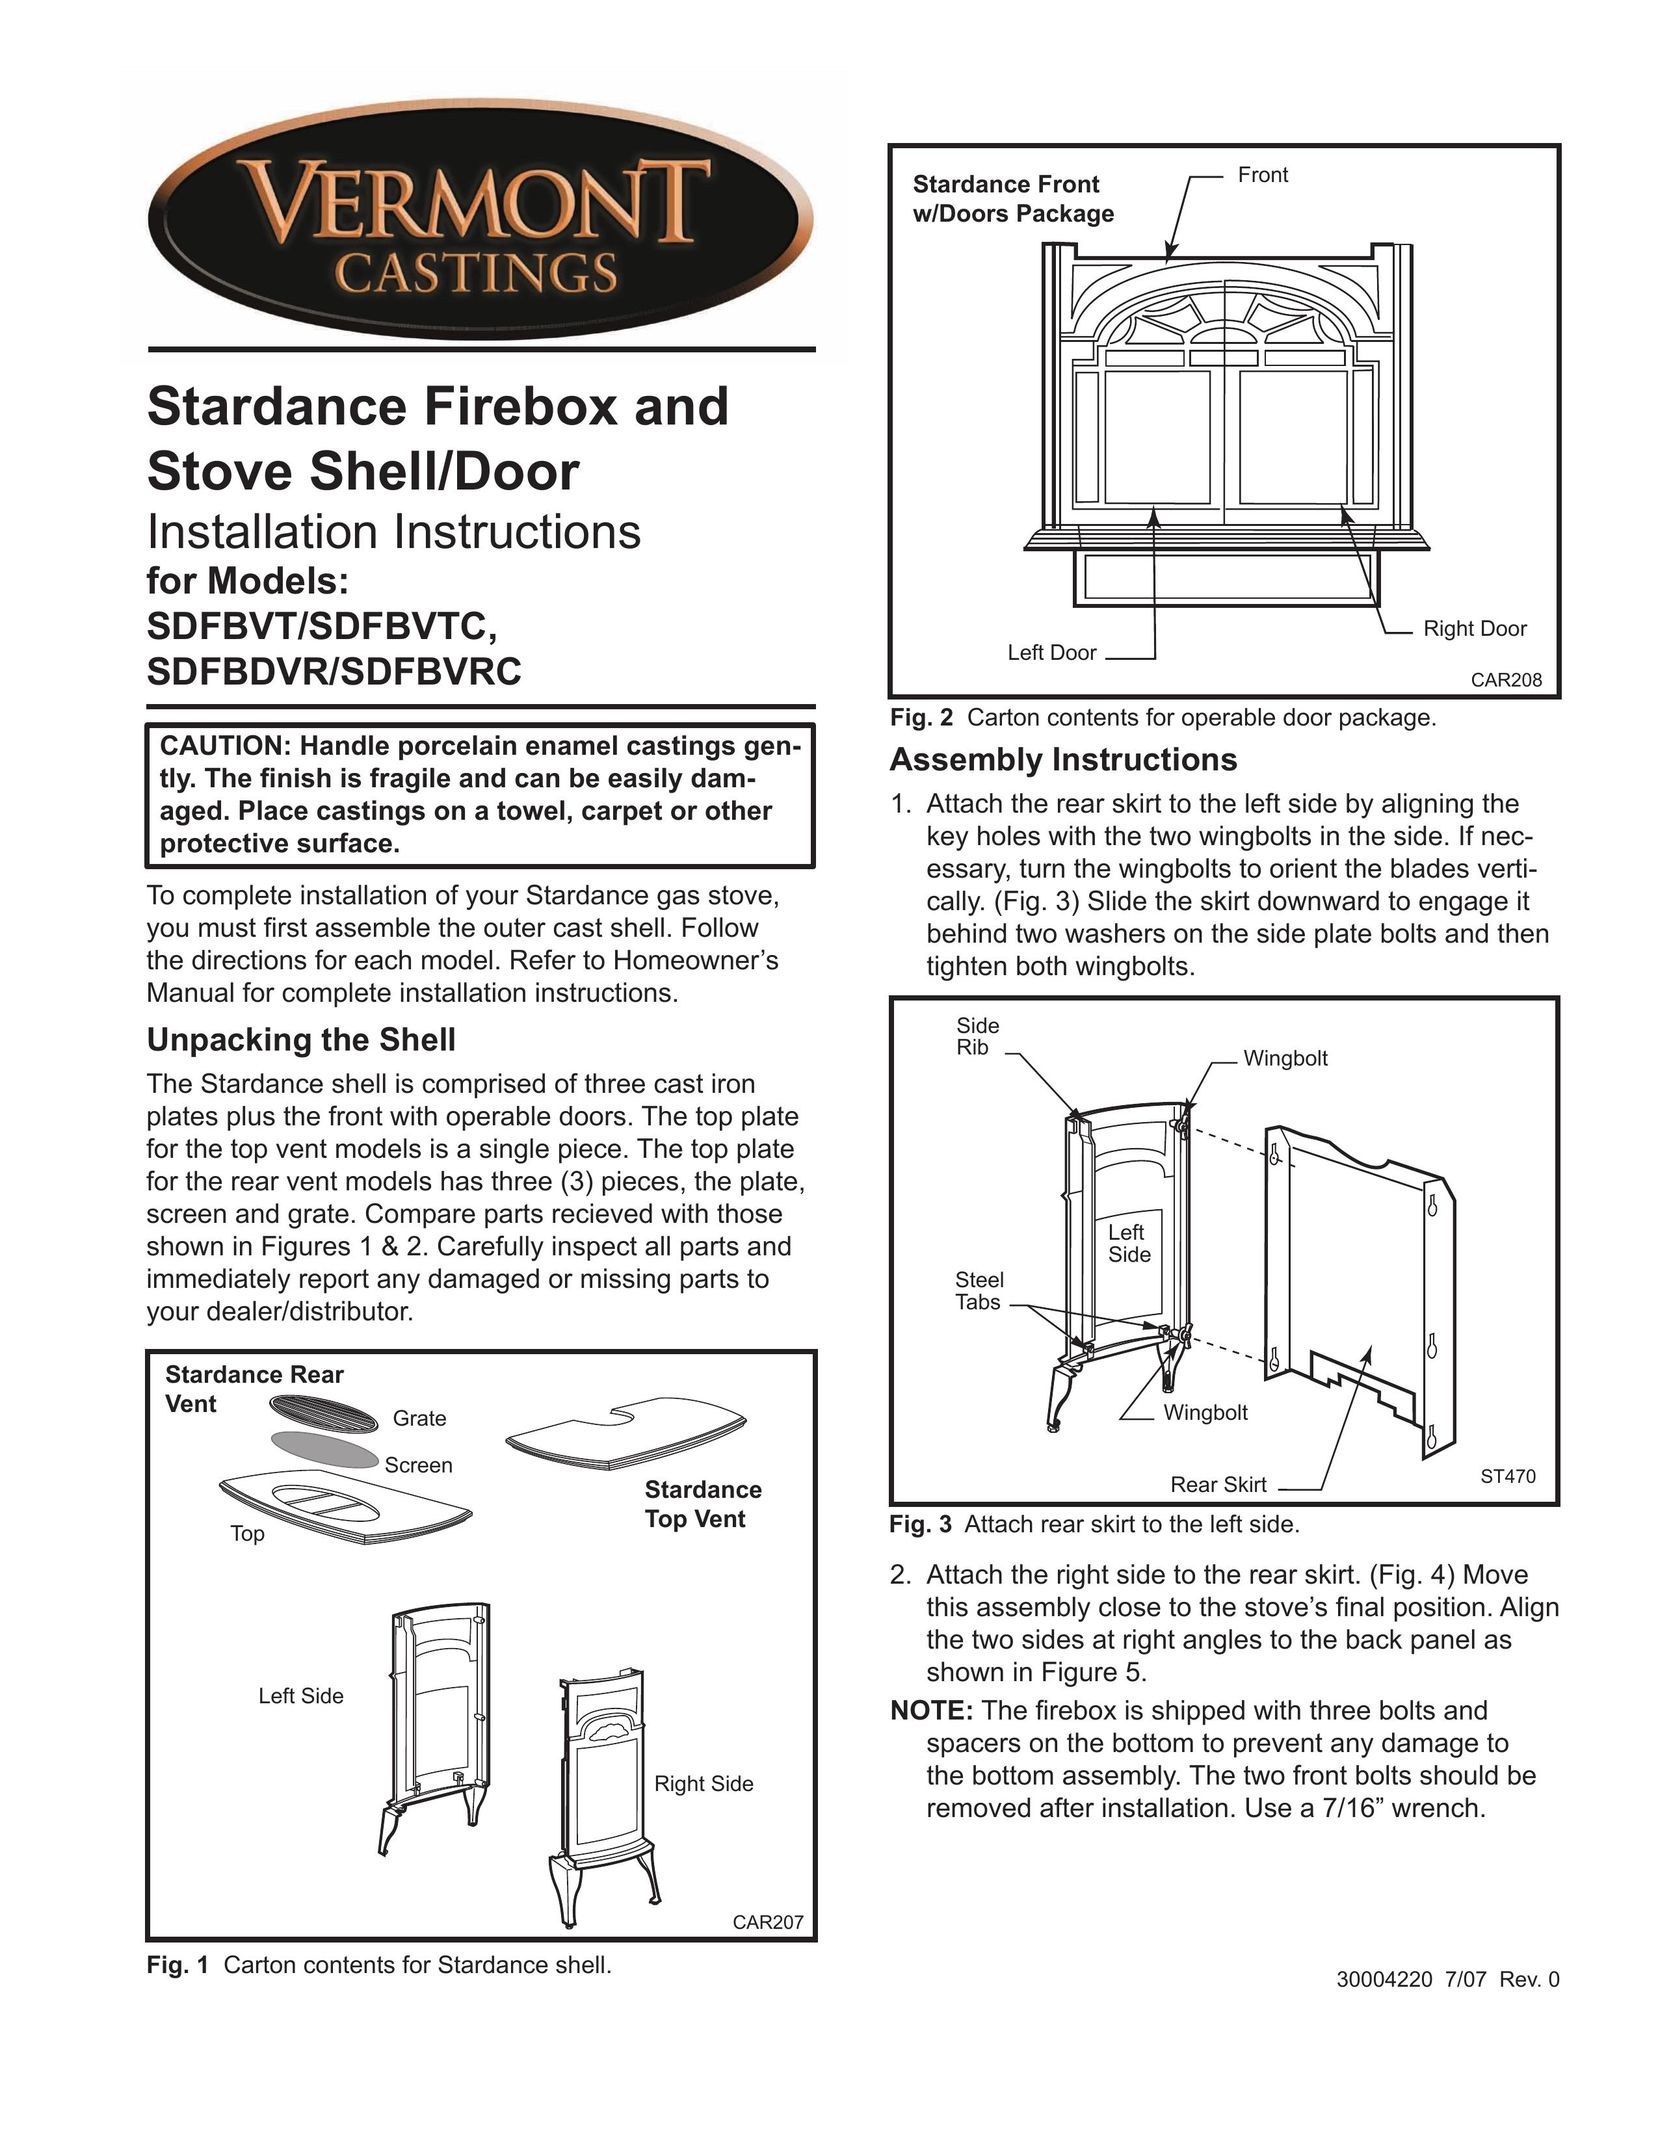 Vermont Casting SDFBVTC Stove User Manual